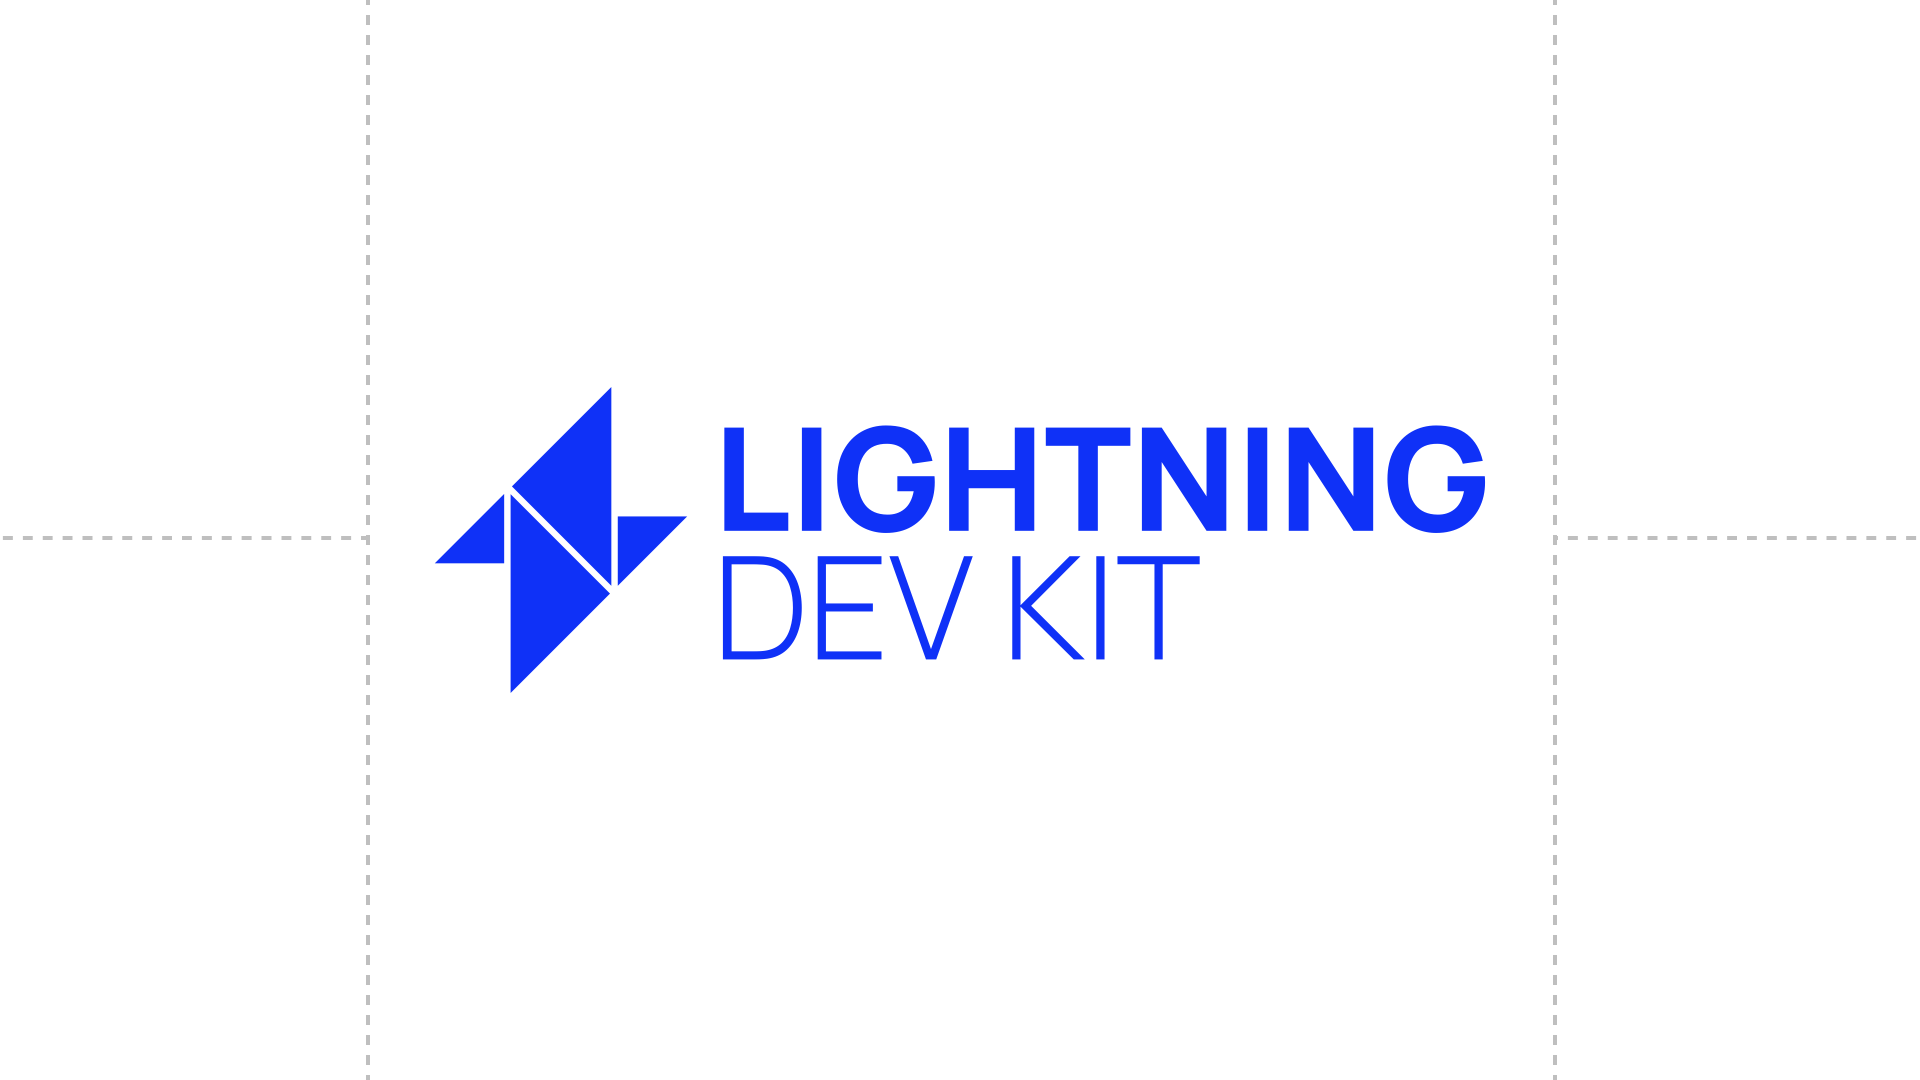 LDK v0.0.117: Improved Payment Success Rates, Bug Fixes & More